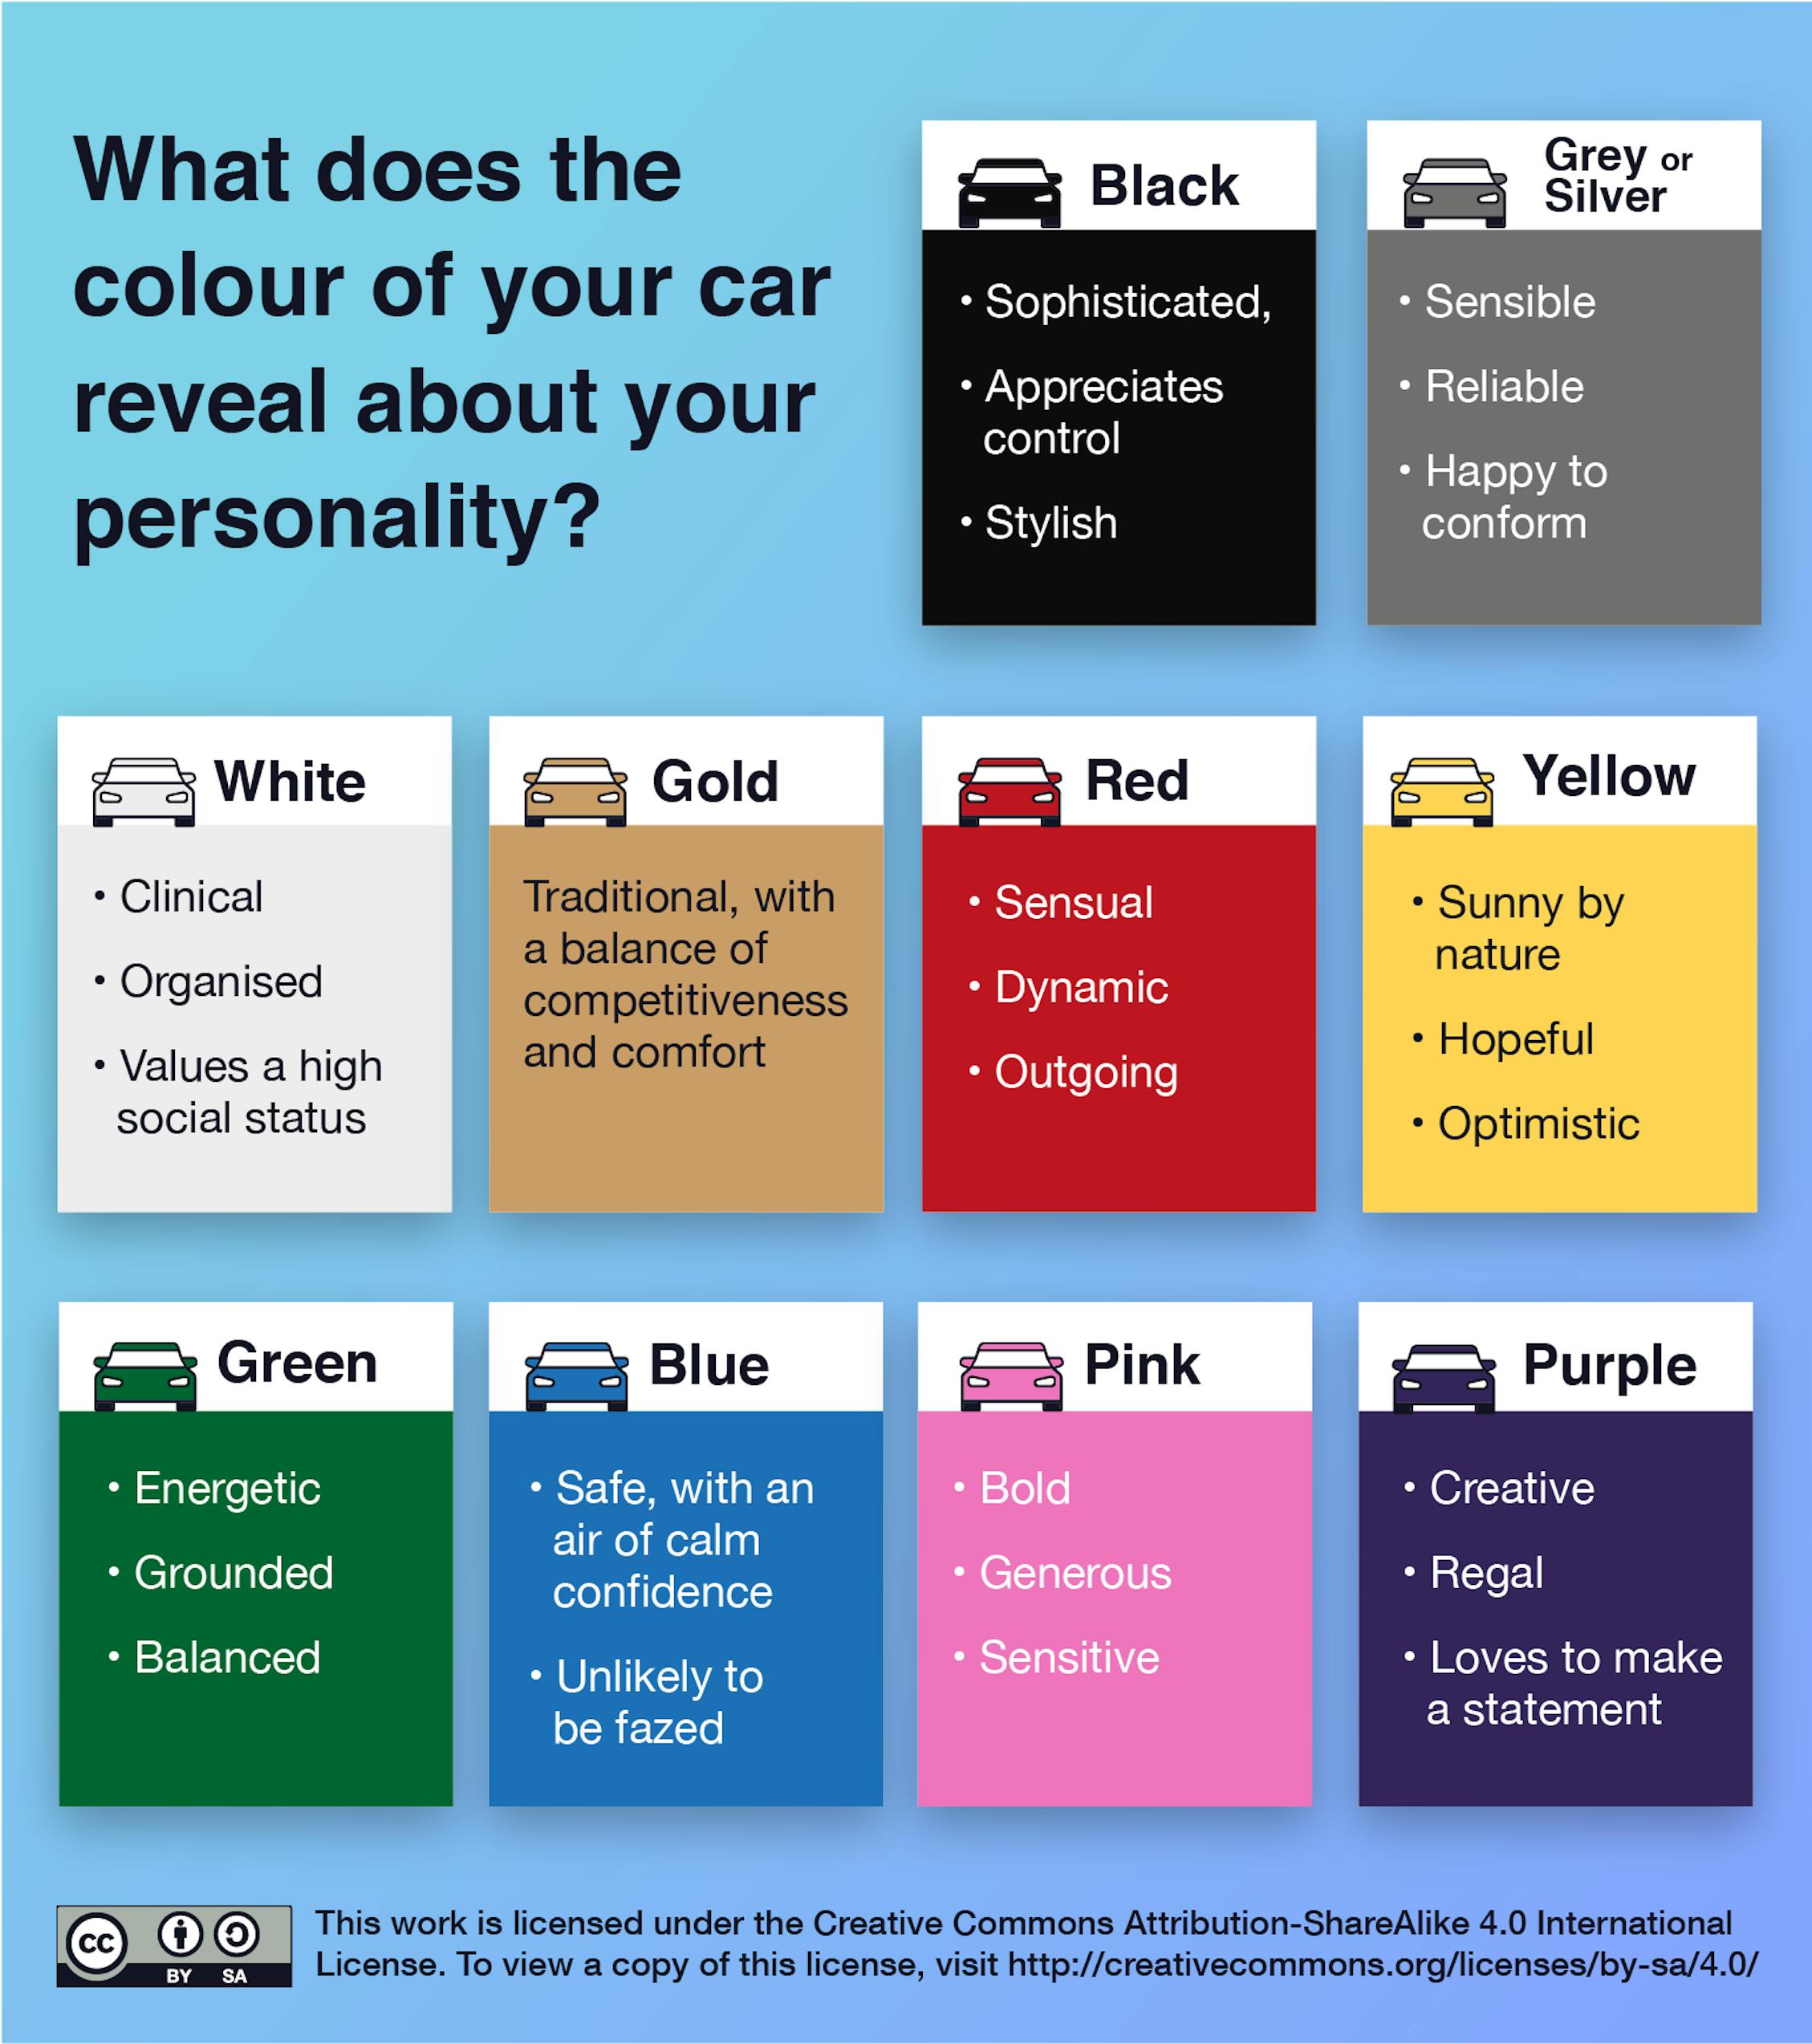 What your car reveals about your personality